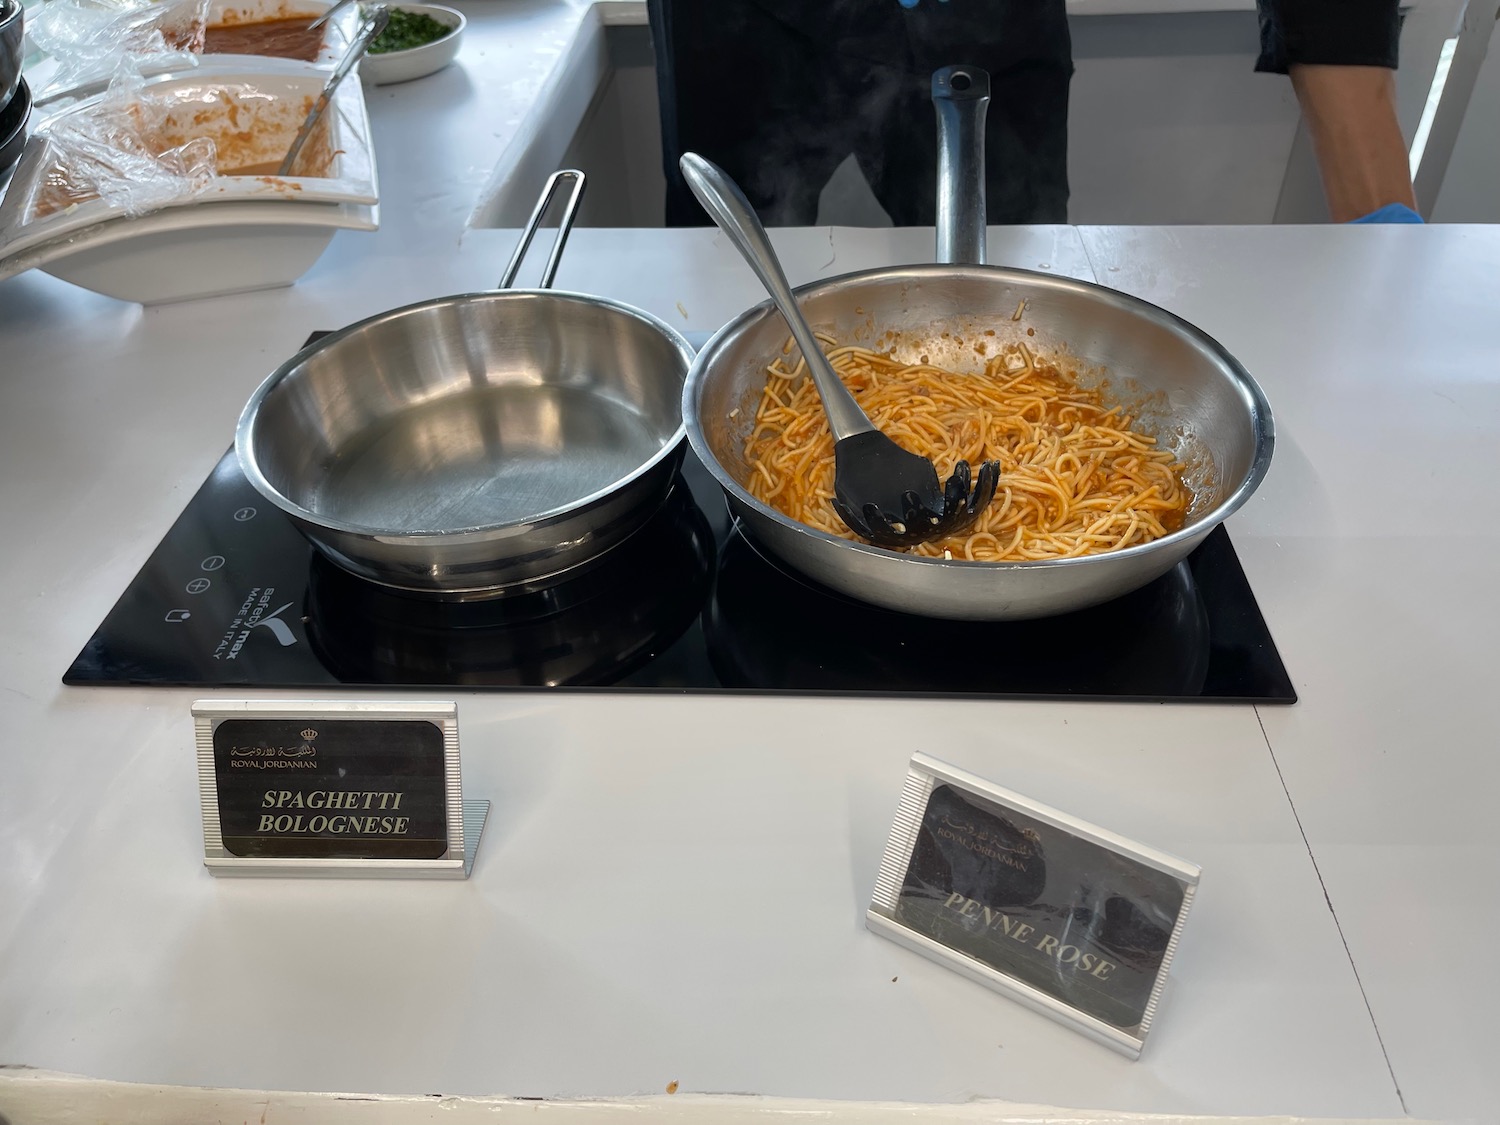 a pan with spaghetti in it on a stove